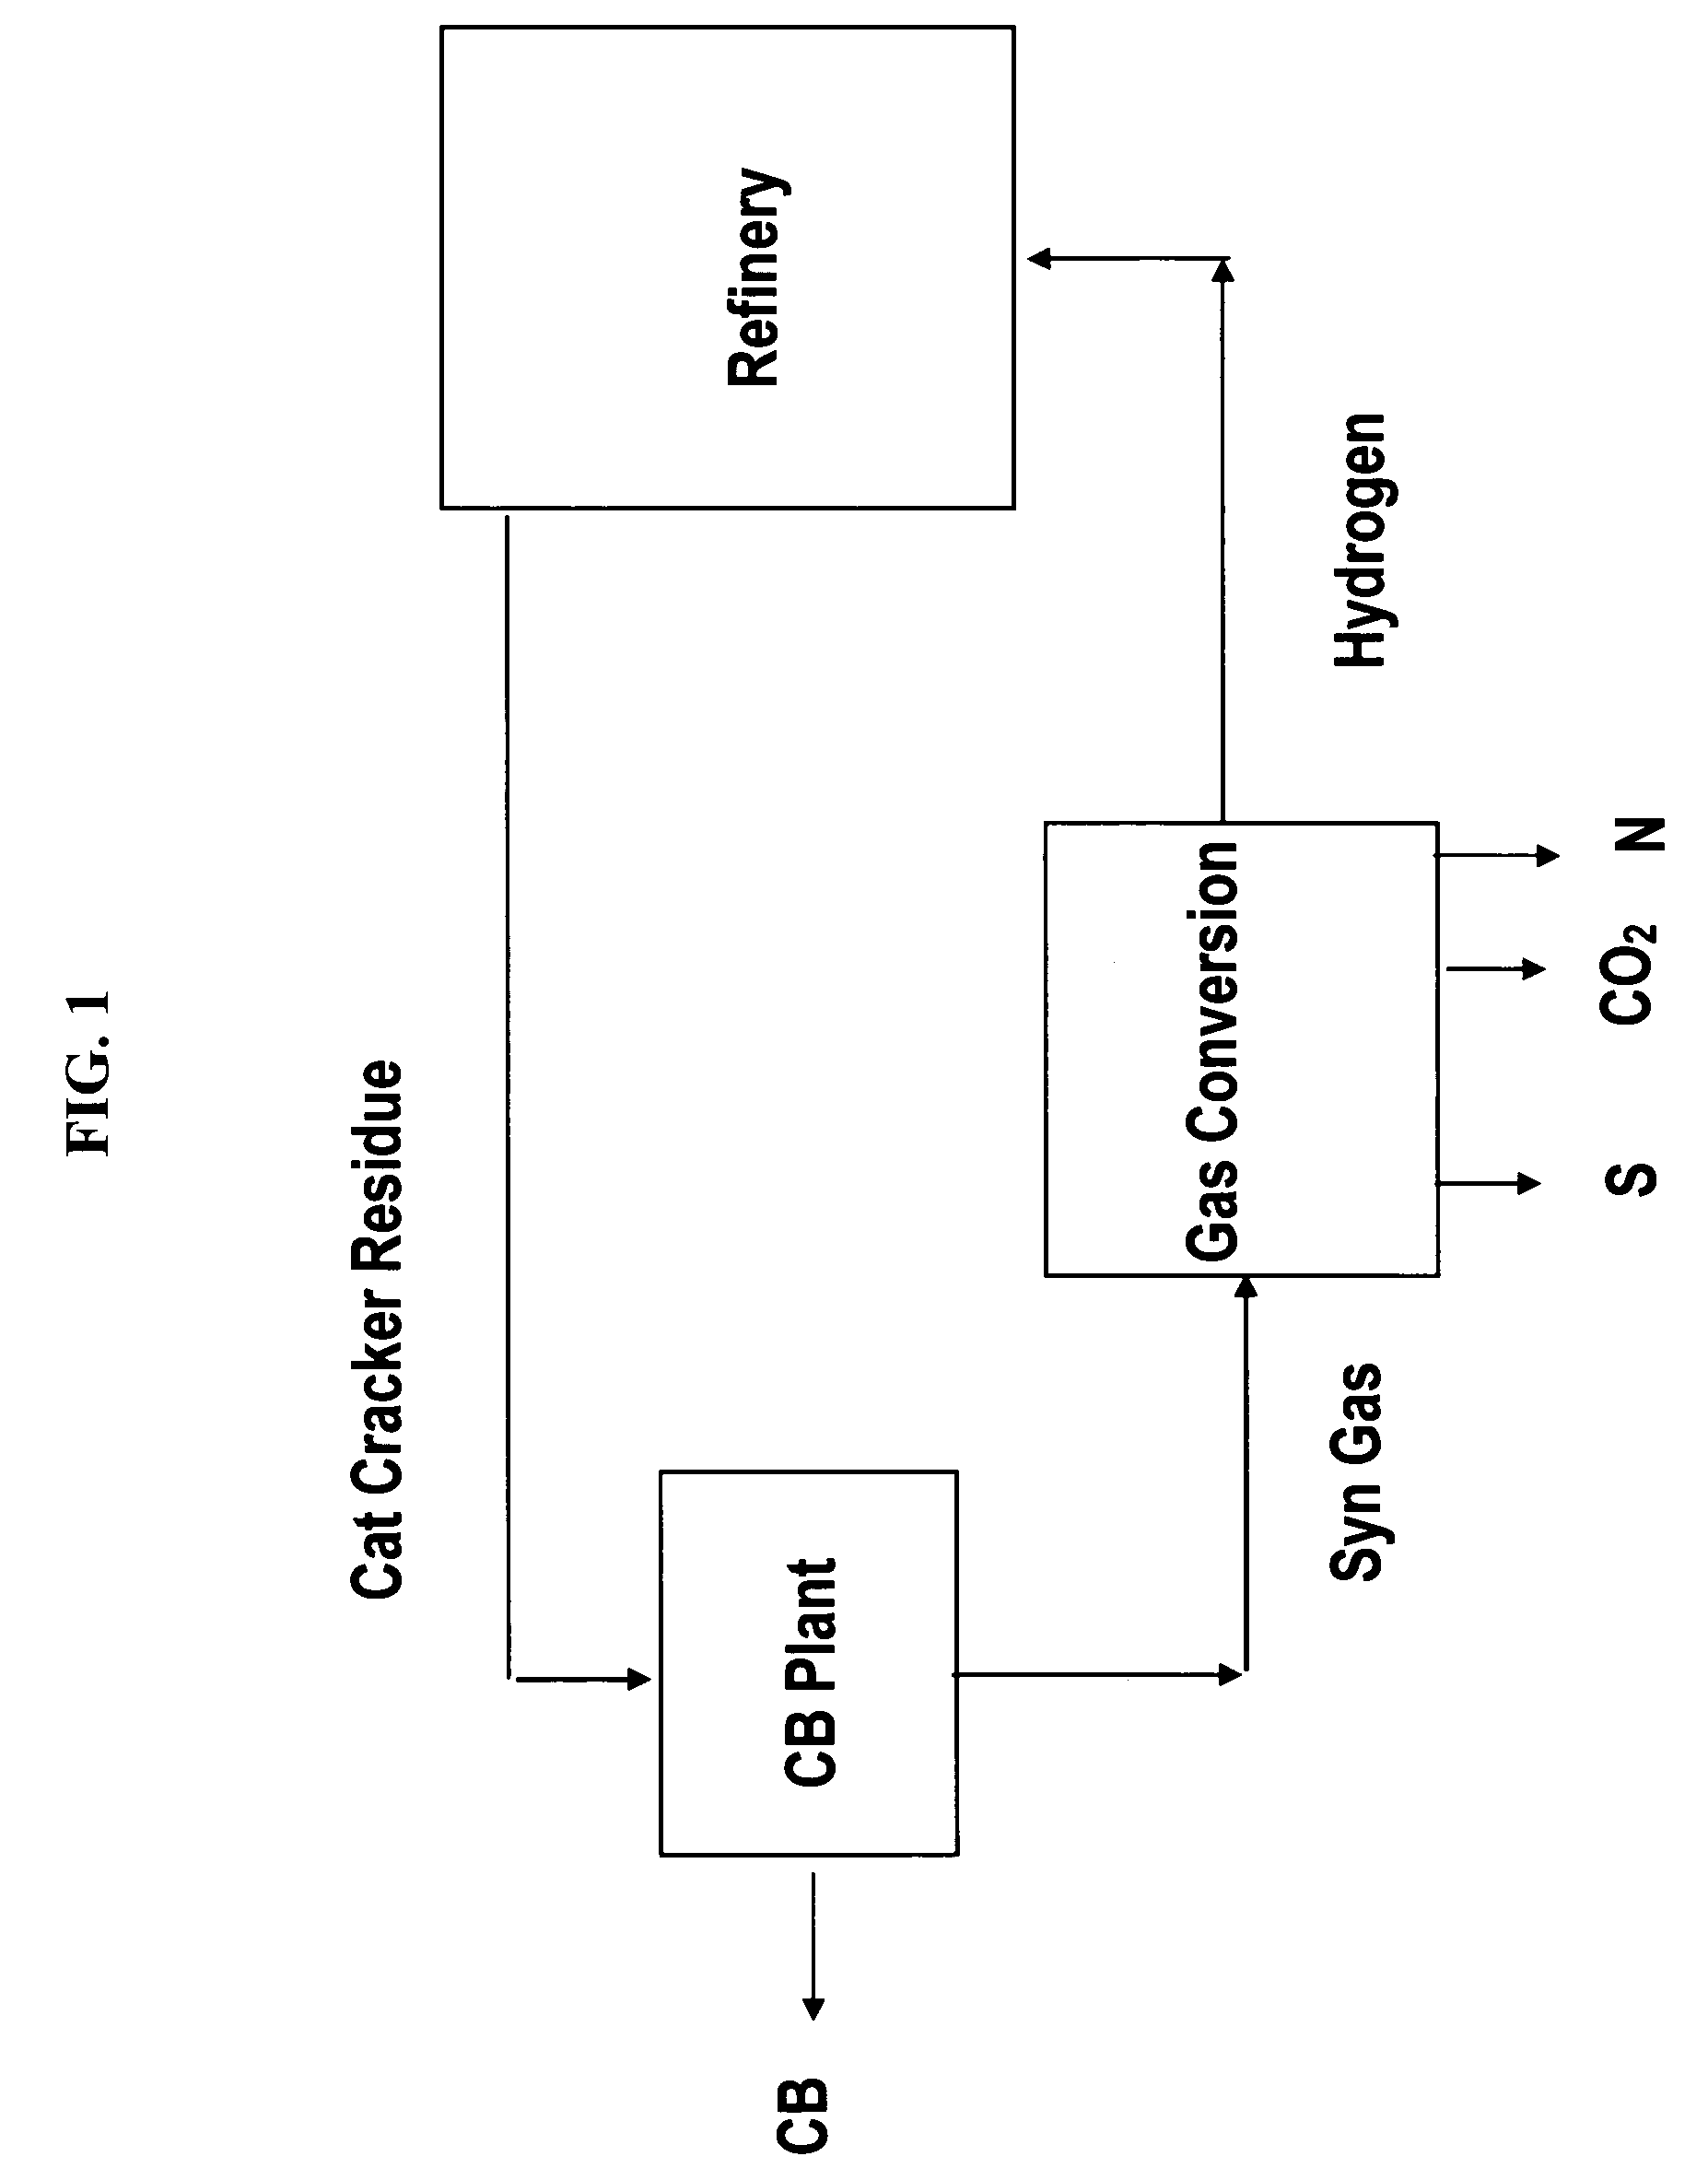 Method to produce hydrogen or synthesis gas and carbon black